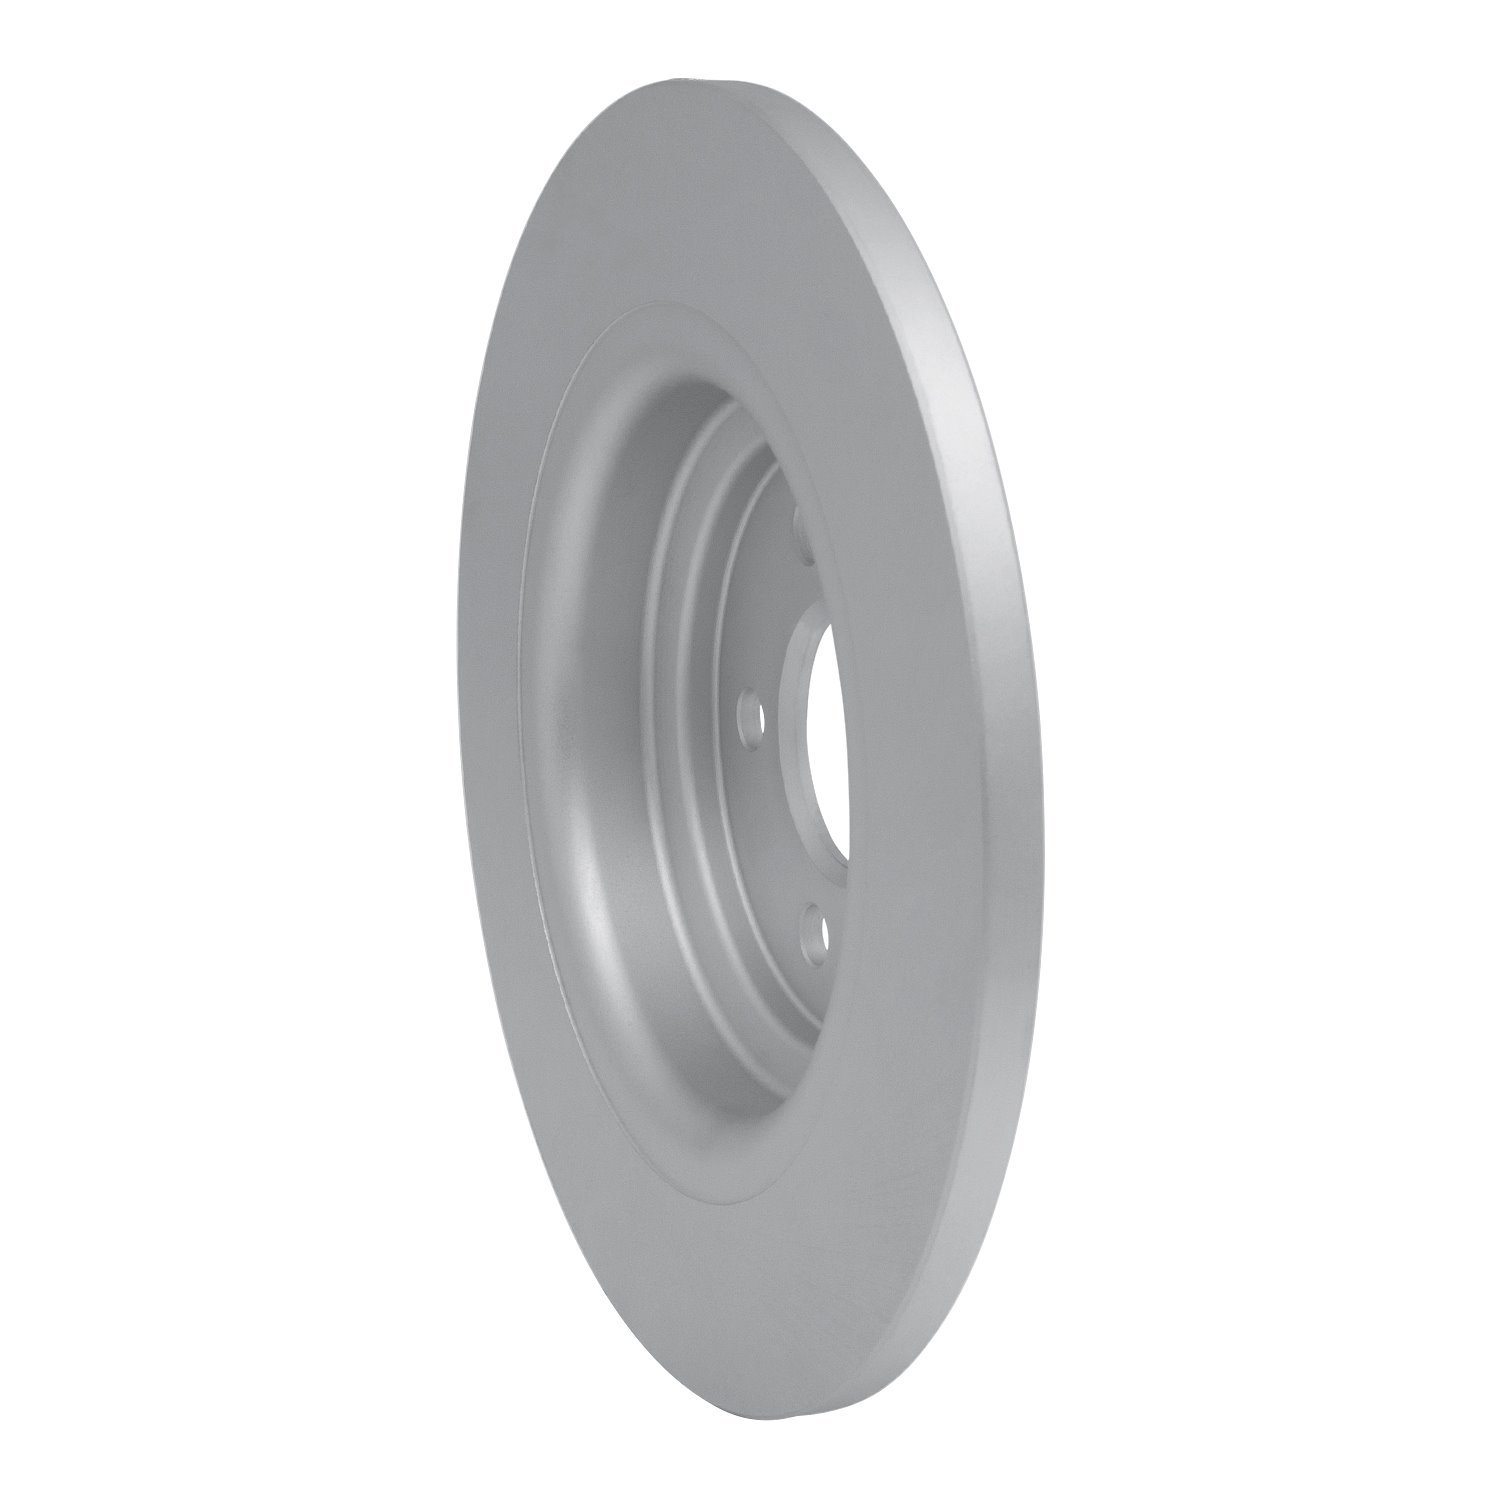 GeoSpec-Coated Rotor, Fits Select Mercedes-Benz, Position: Rear